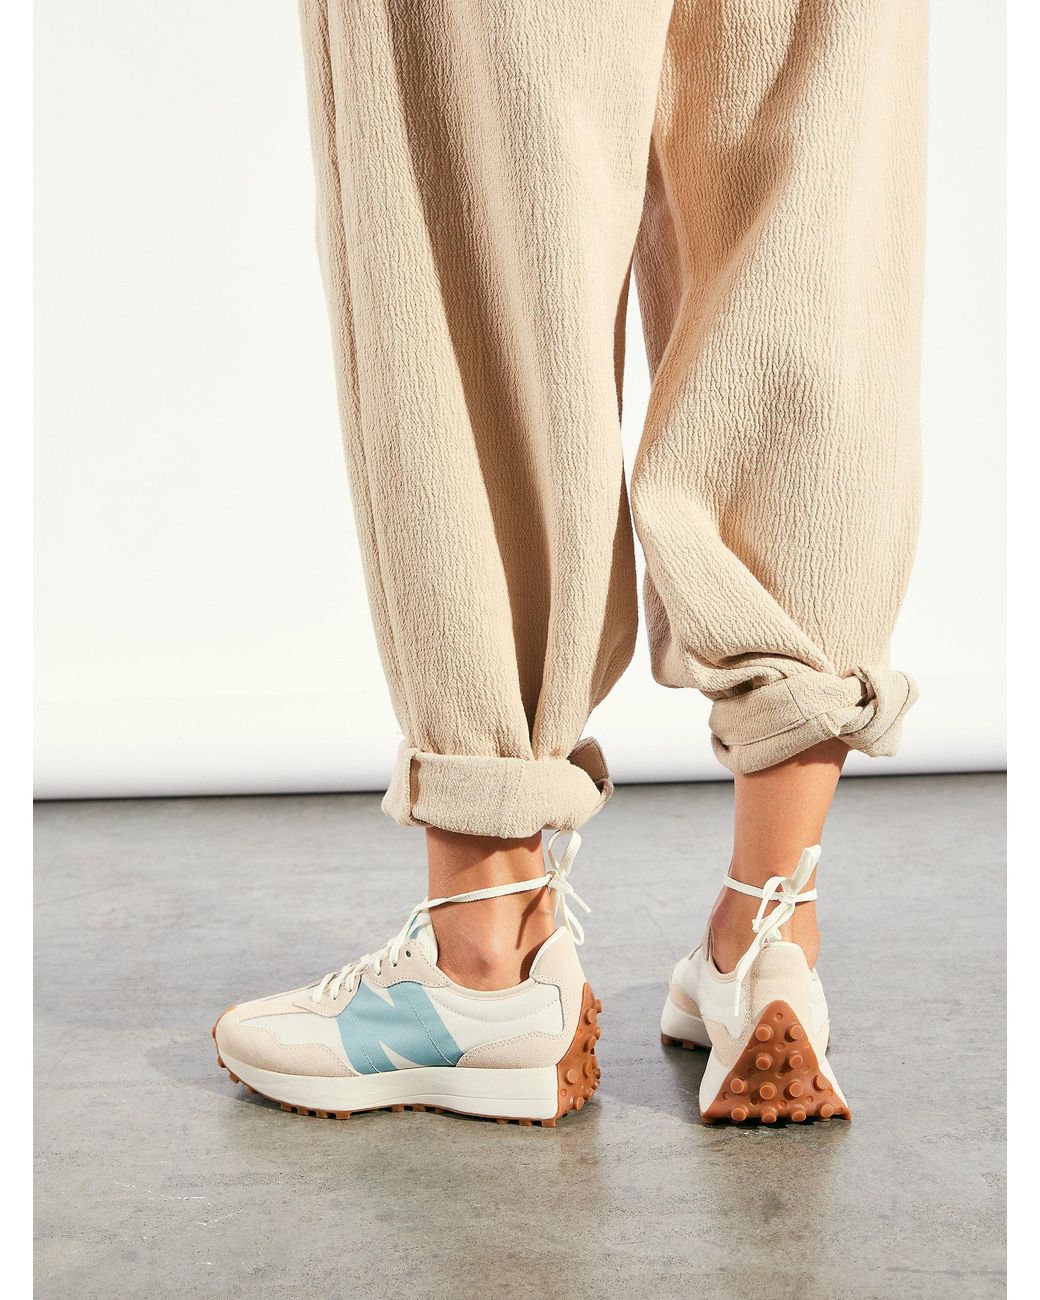 Free People New Balance 327 High Learning Sneakers | Lyst